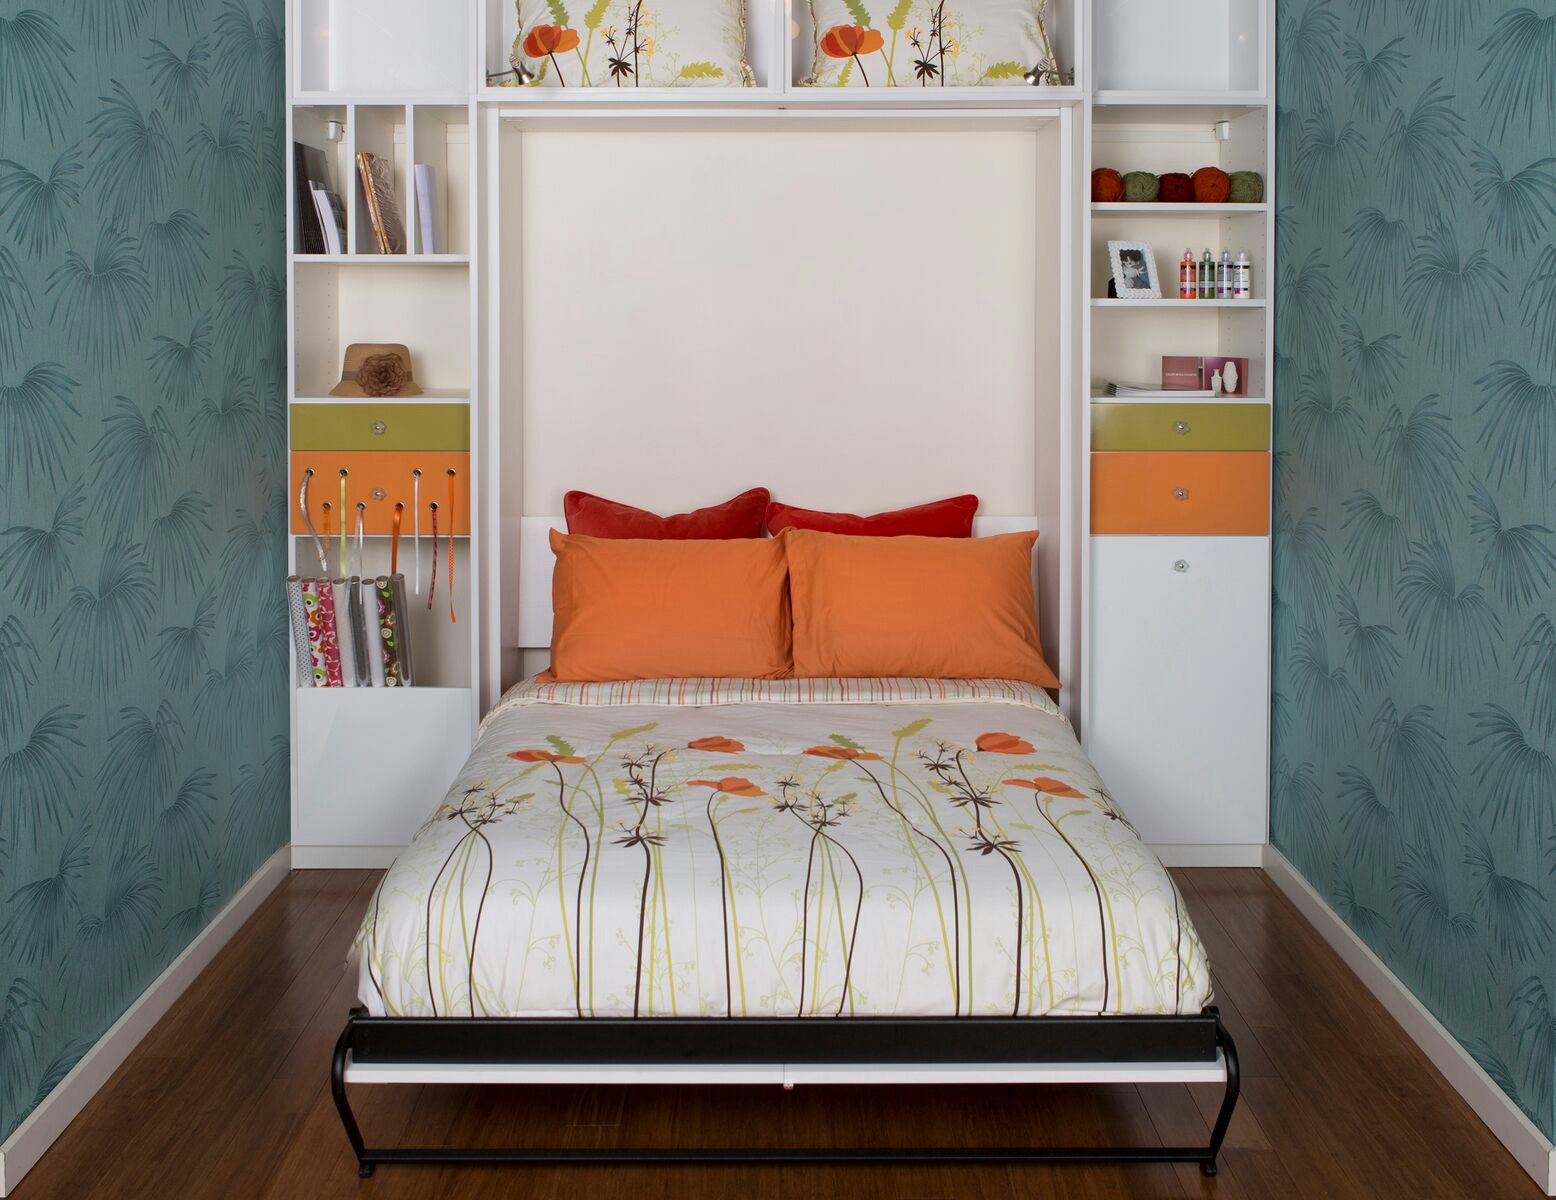 Common Questions About Murphy Beds Answered - California Closets